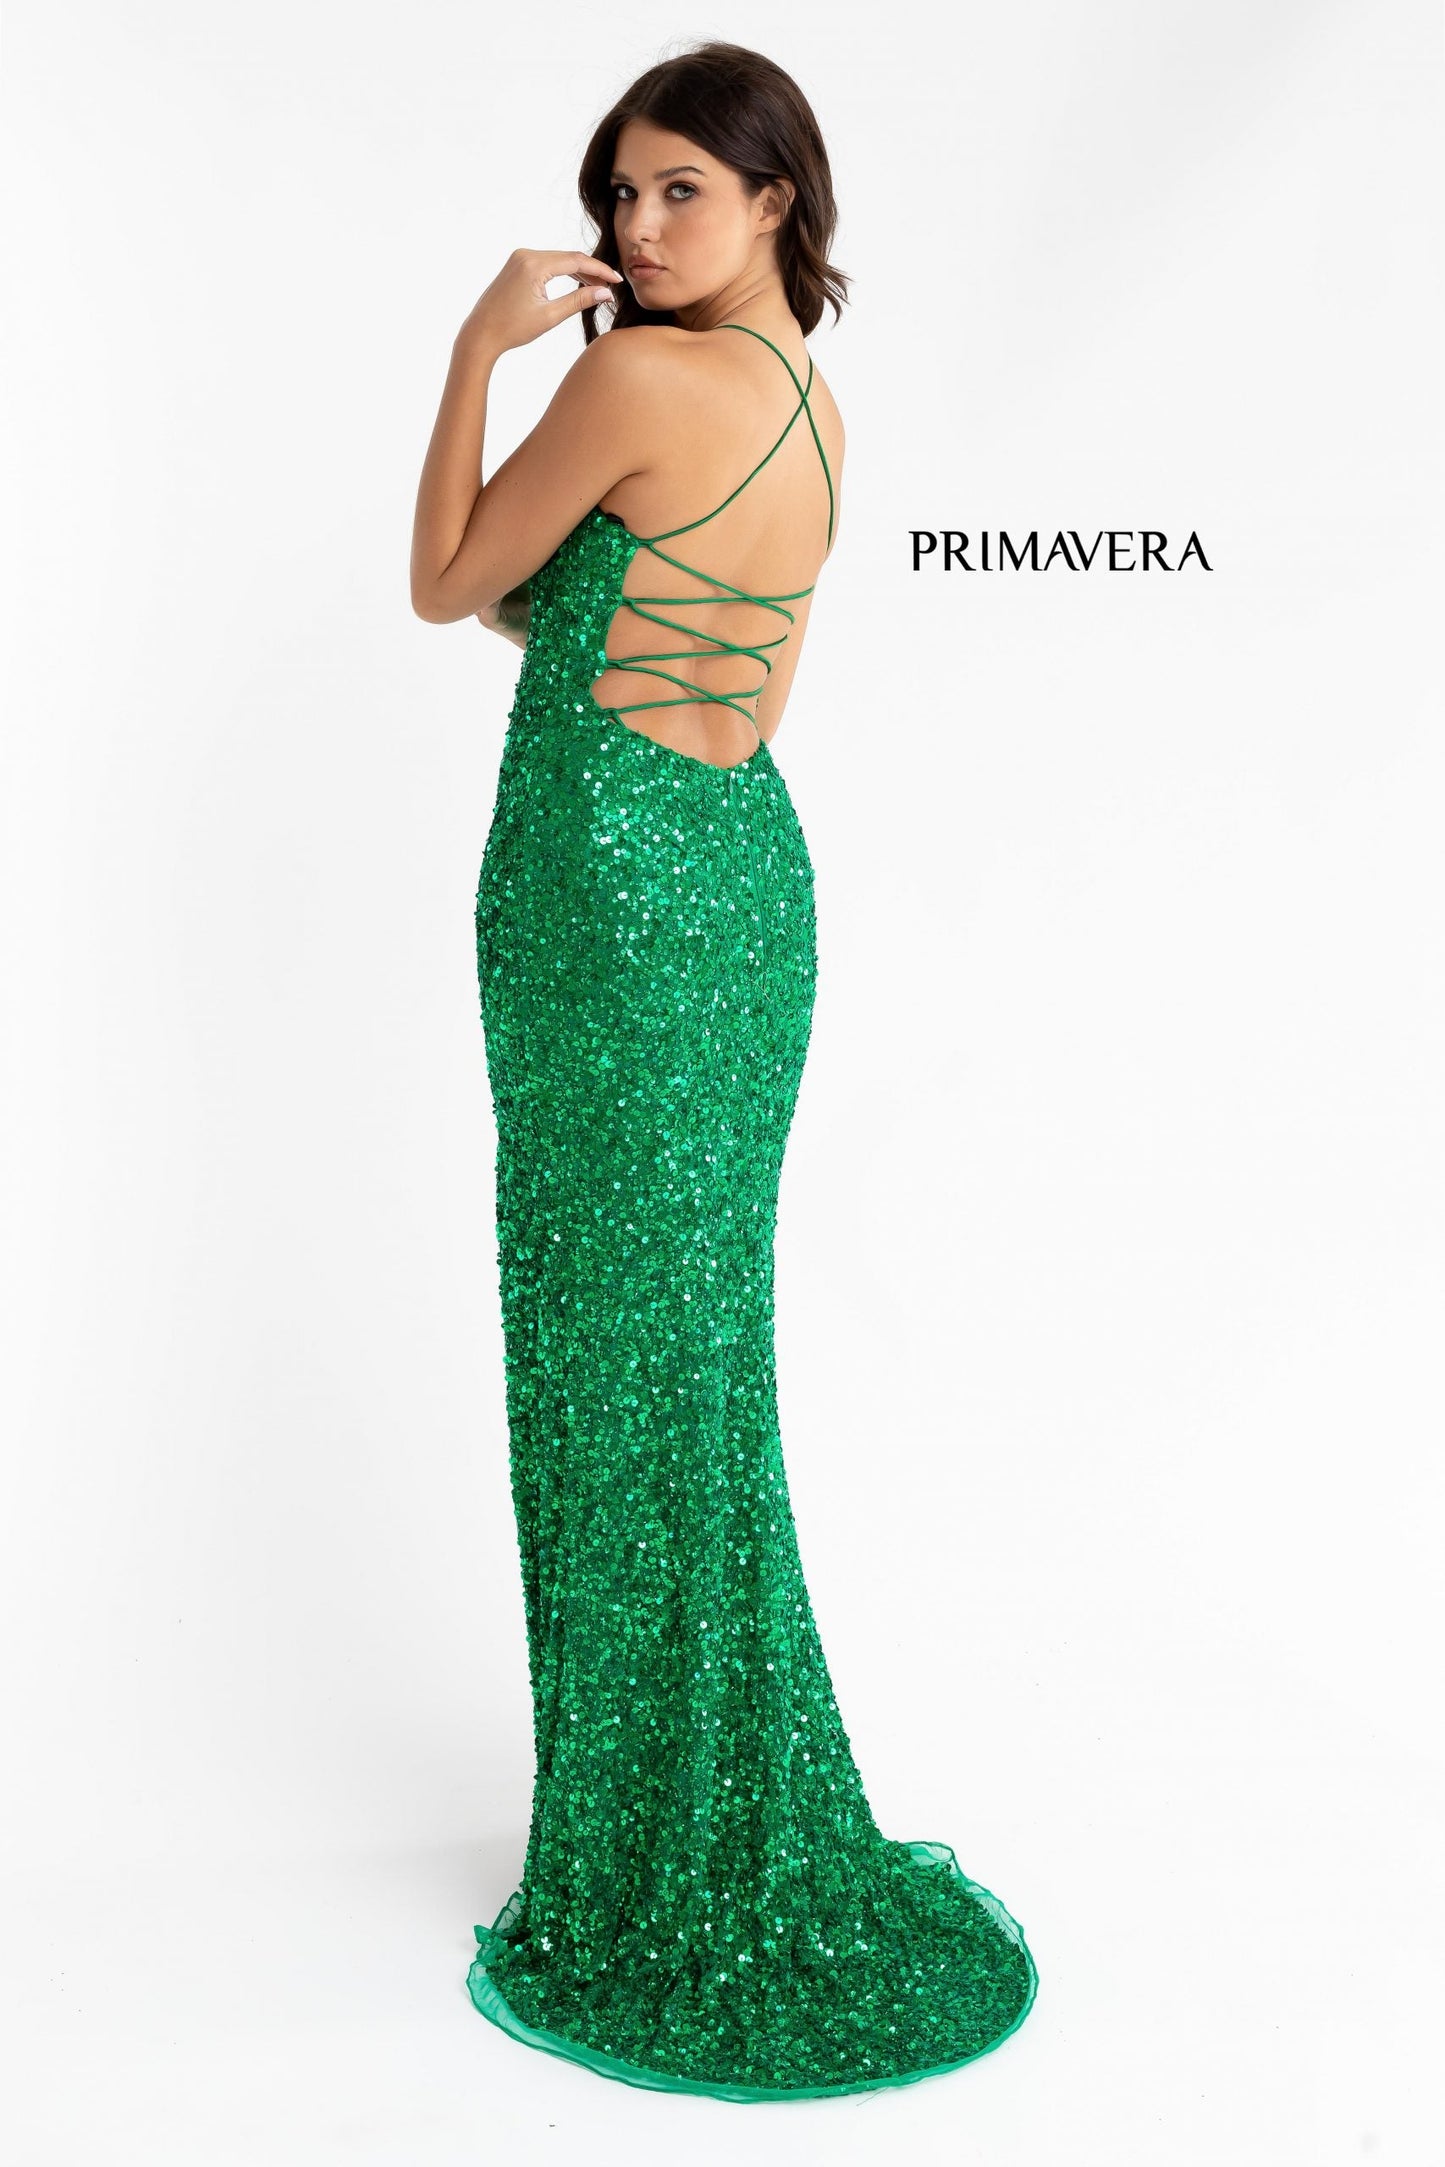 Primavera Couture 3290 This prom dress adds a pop to the multi sequins dress.  With a scoop neckline and spaghetti straps that cross and tie in the back.  This long evening dress has a side slit. And need I say, NEON!  Available Colors: Midnight, Emerald, Turquoise, Plum, Peach, Blue, Black, Fuchsia, Cream, Neon Sage, Neon Coral, Neon Lilac, Bright Blue, Rose, Neon Pink, Orange, Baby Pink, Purple, Royal Blue, Ivory, Gold, Charcoal, Red, Apple Green, Forrest Green, Yellow, Mint  Available sizes:  18, 20, 22